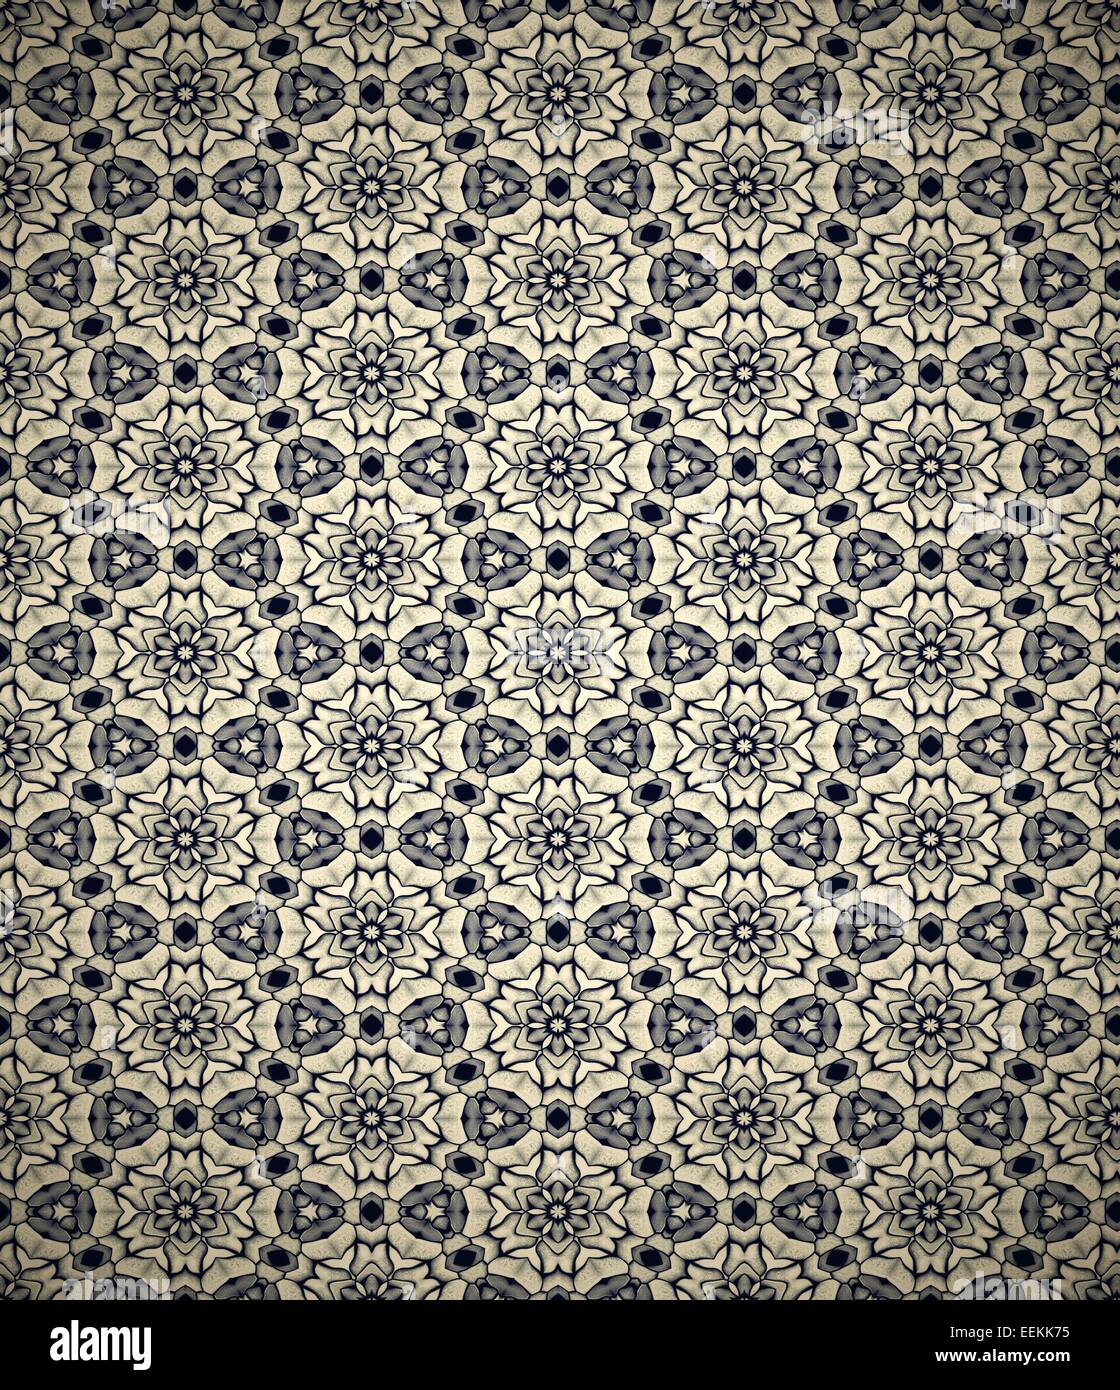 Dark retro wallpaper with flower and star pattern. Stock Photo